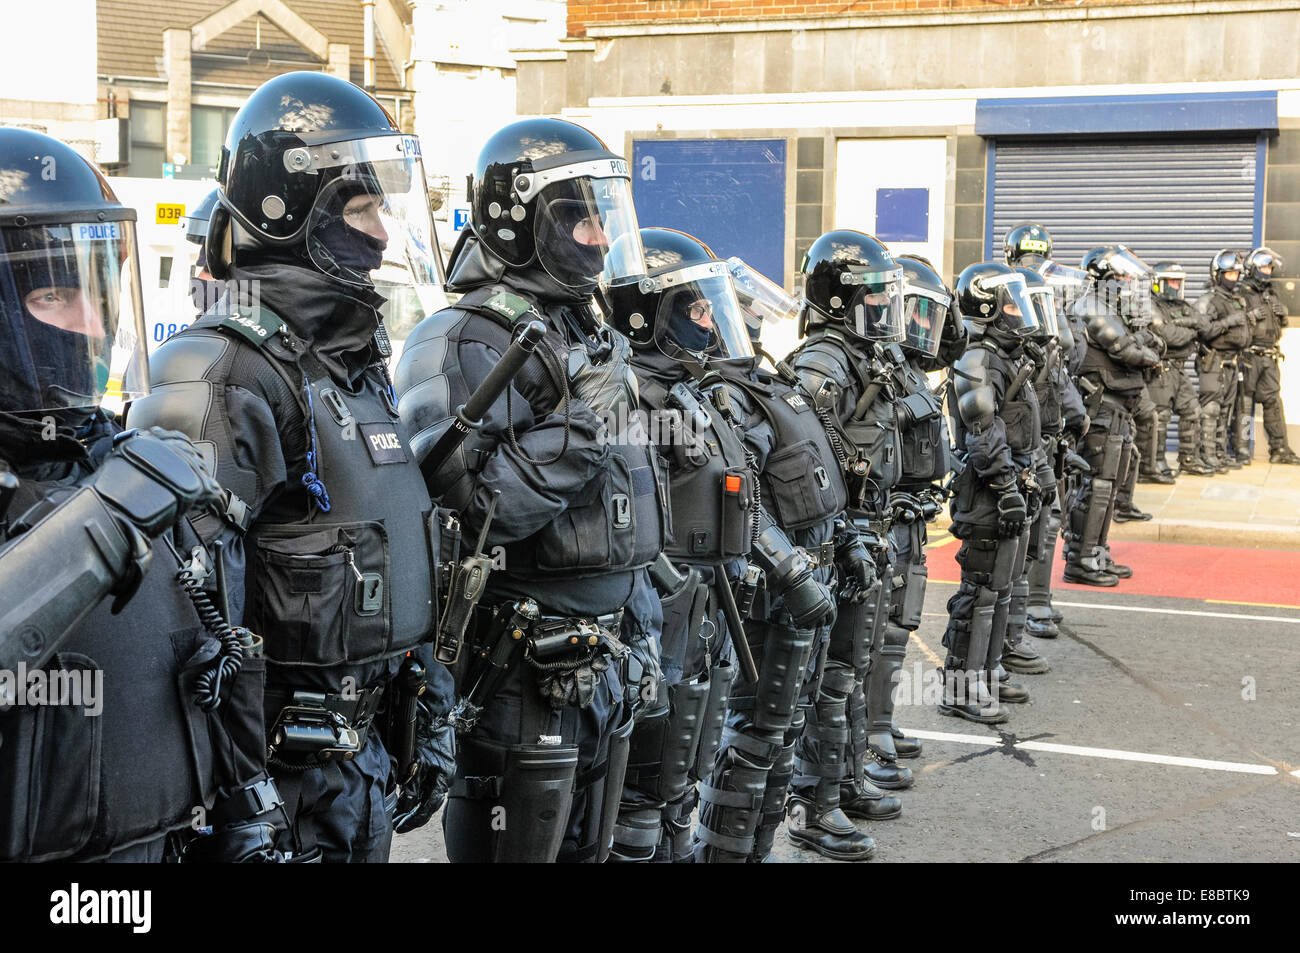 Belfast, Northern Ireland. 4 Oct 2014 - After coming under attack from golf balls, PSNI officers in full riot gear form a cordon across Castlereagh Street to prevent around 50 loyalist protesters from passing. Credit:  Stephen Barnes/Alamy Live News Stock Photo